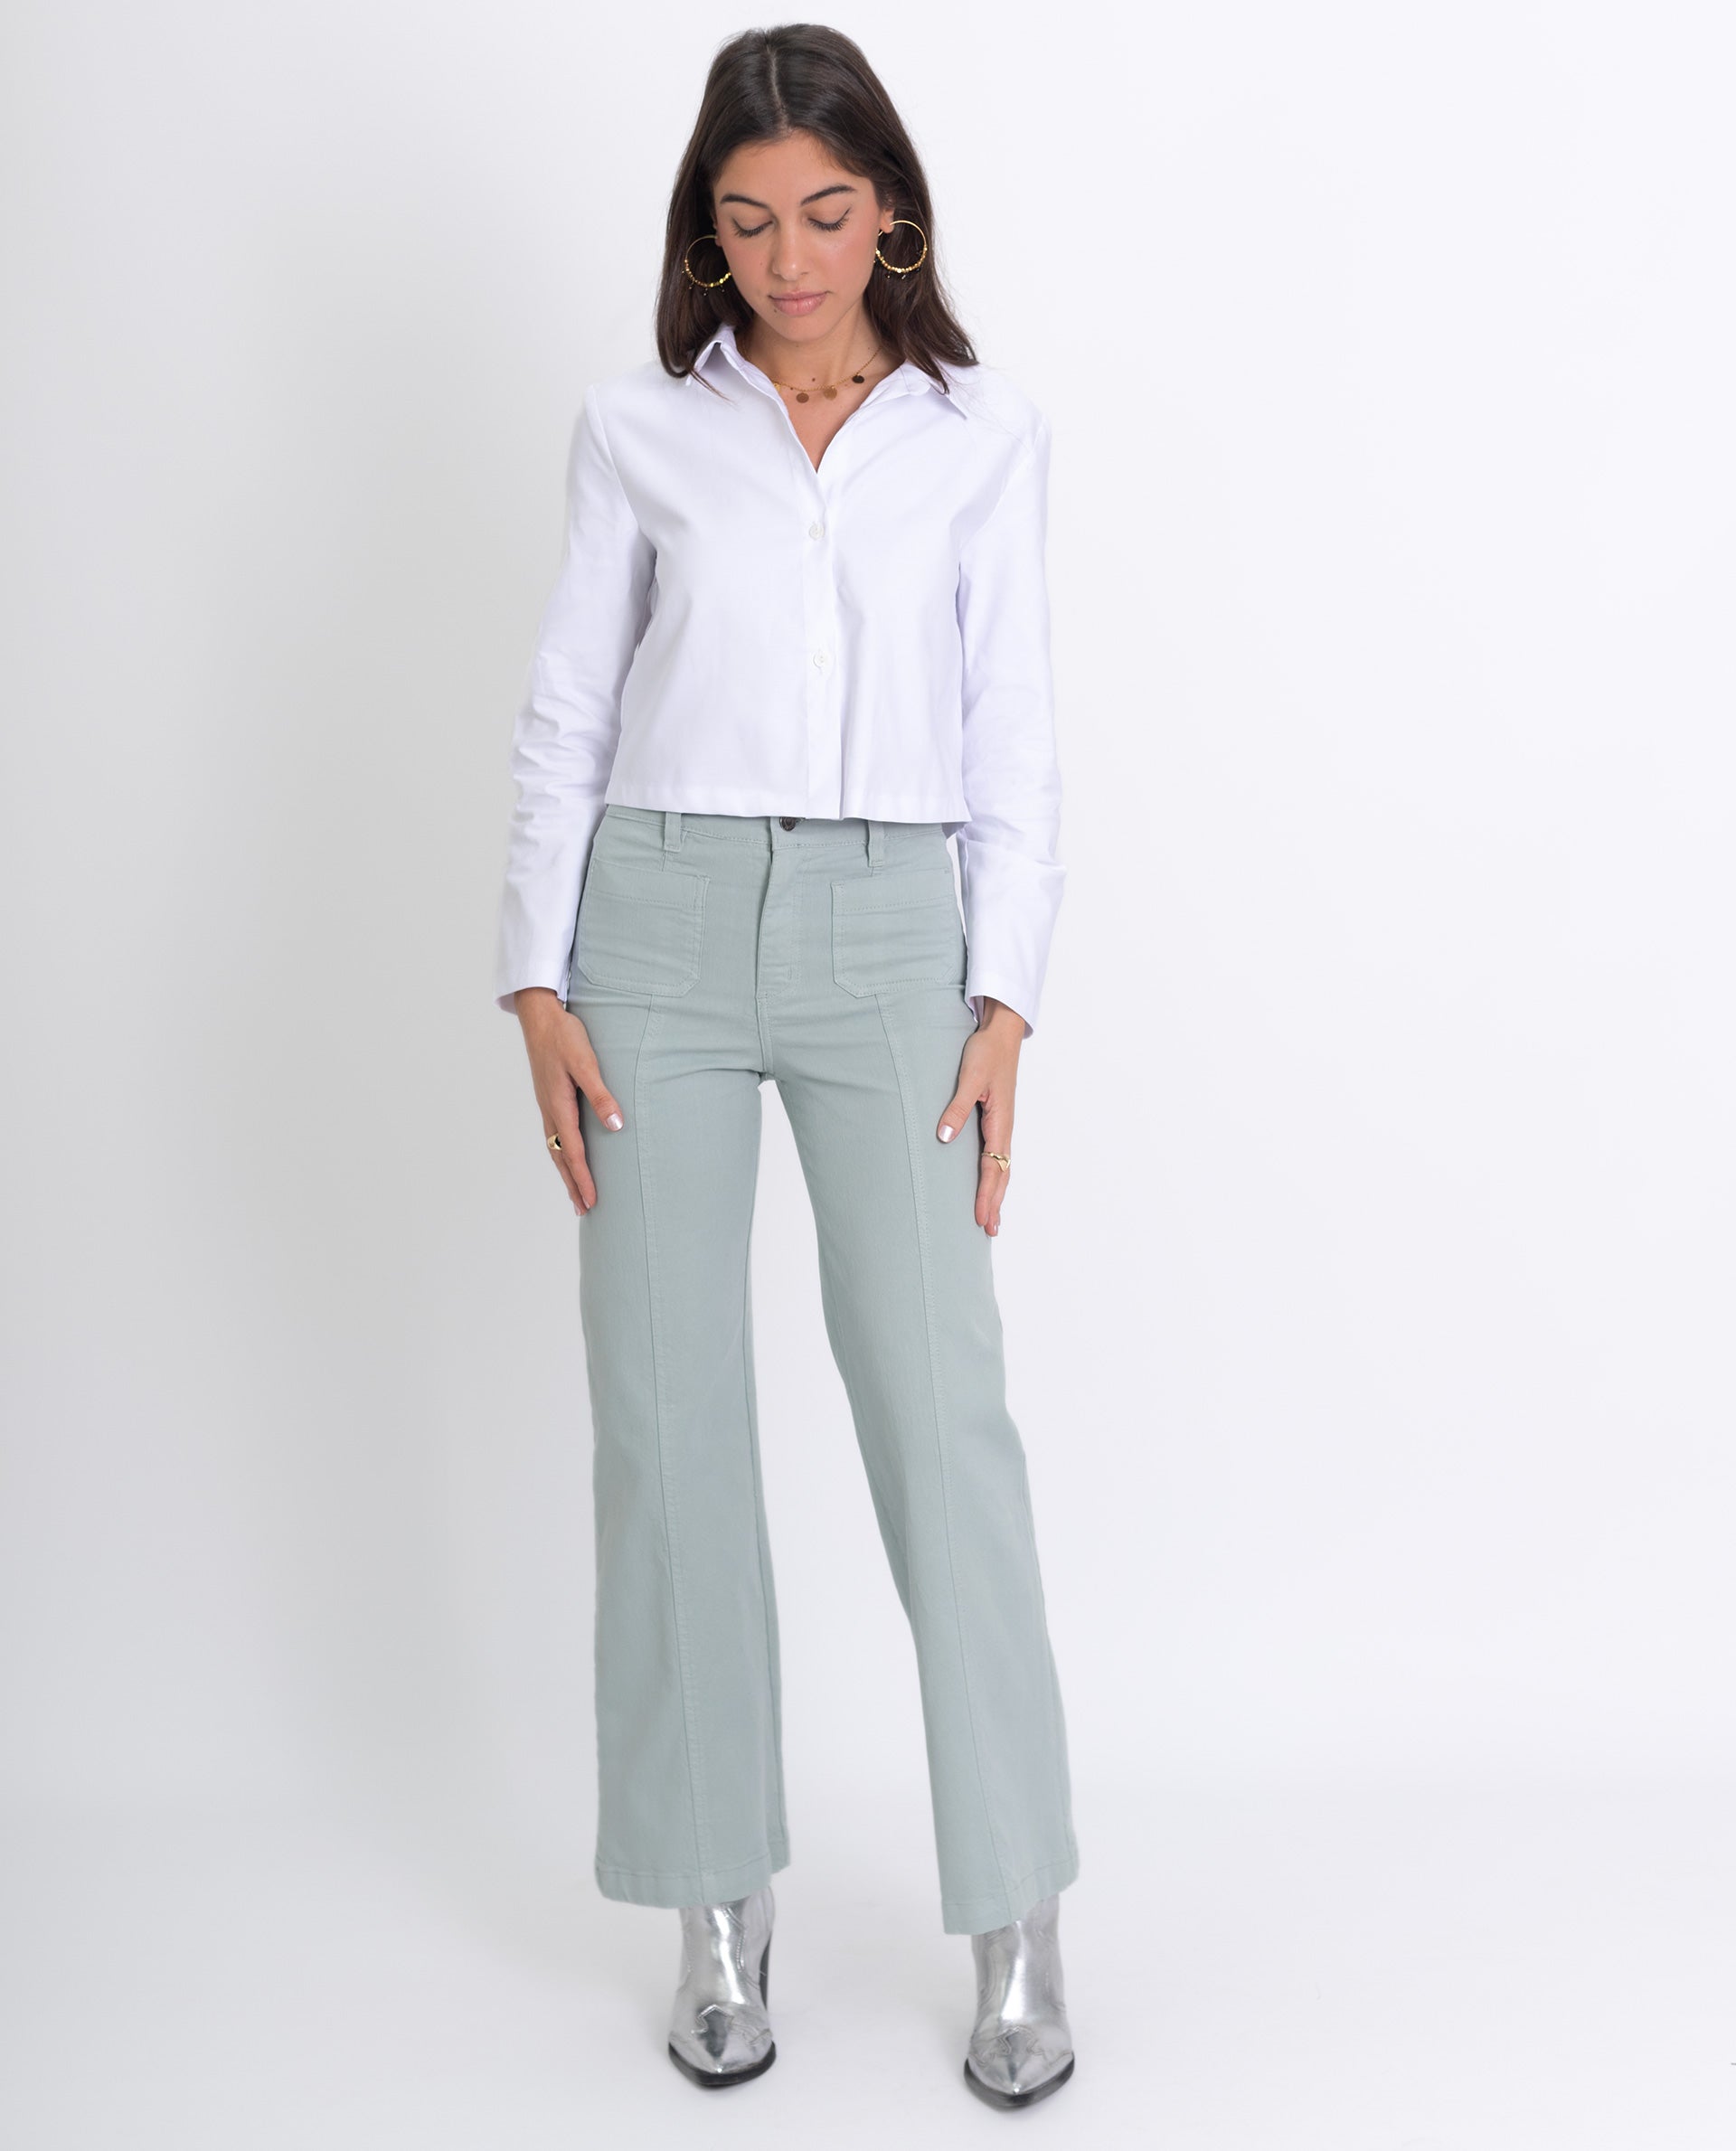 Women's White Cropped Shirt with Buttons